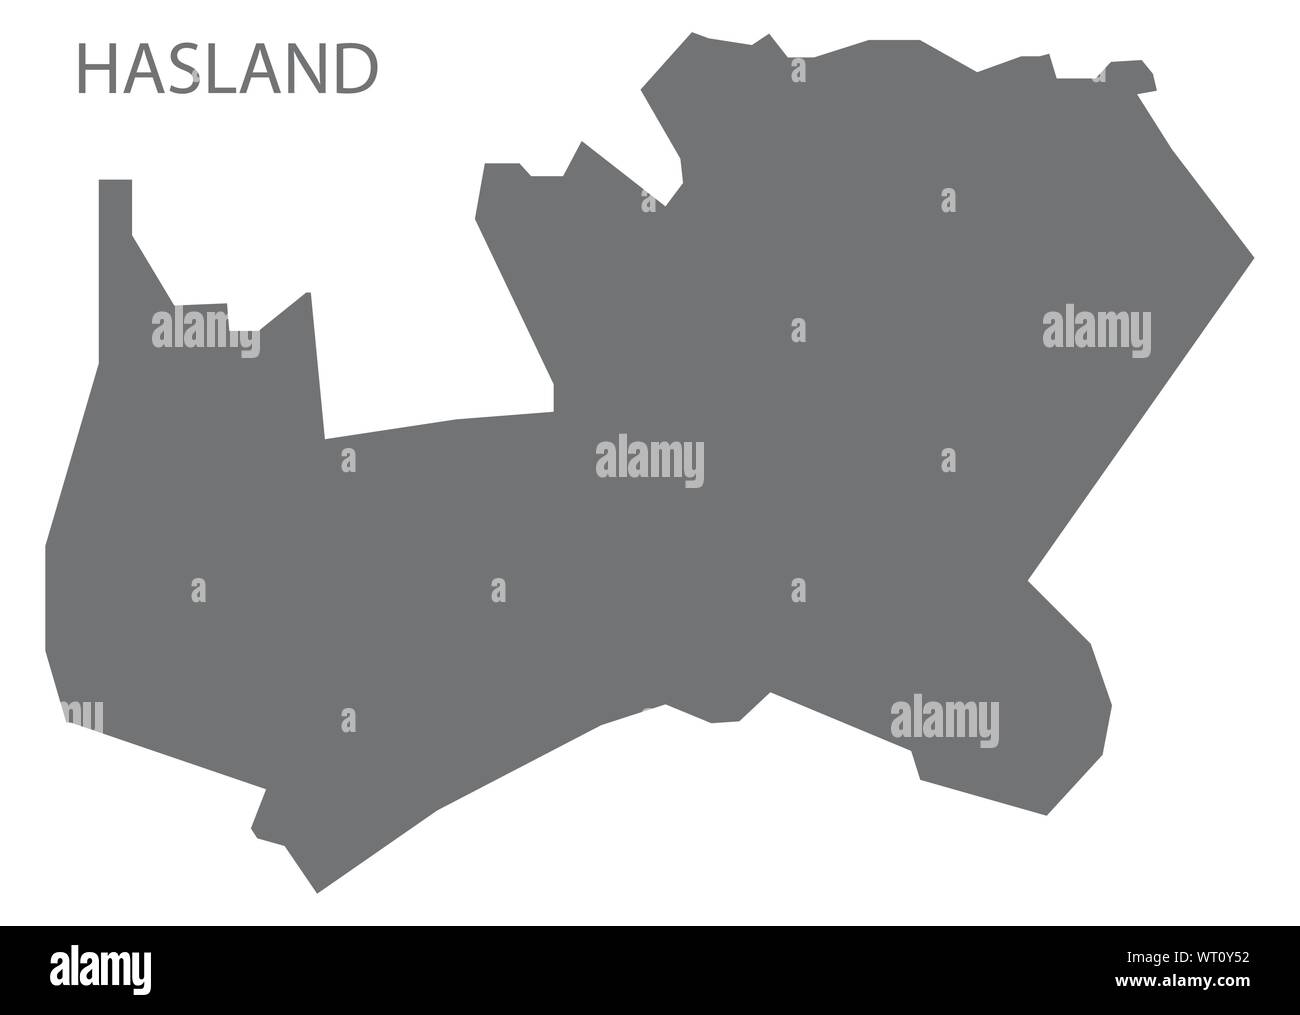 Hasland grey ward map of Chesterfield district in East Midlands England UK Stock Vector